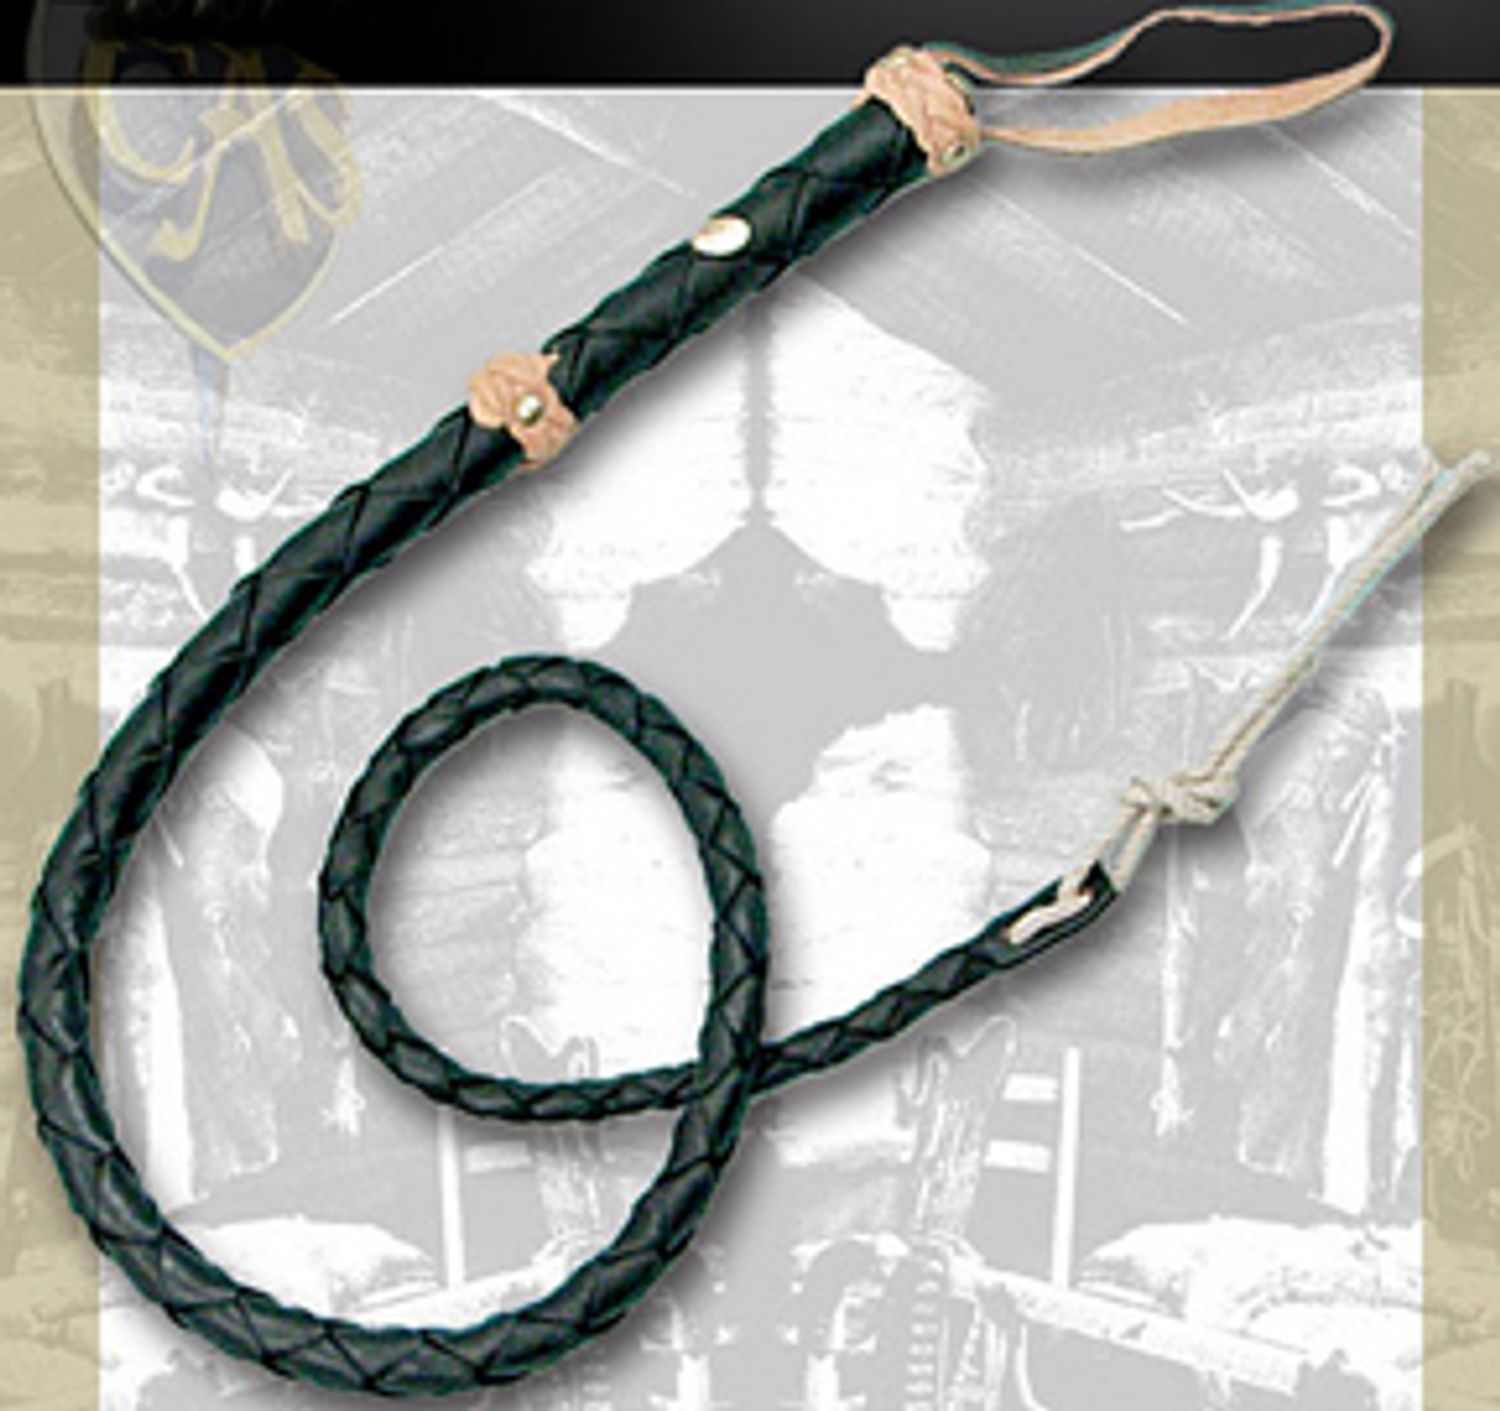 Perfect For Working Livestock Or Sport Whip Cracking 1-6M,Black,1m DSJMUY Whip Classic Black Bullwhip Premium Handmade Genuine Real Leather Long Horse Equestrian Crop Whip Braided Bull Whip 